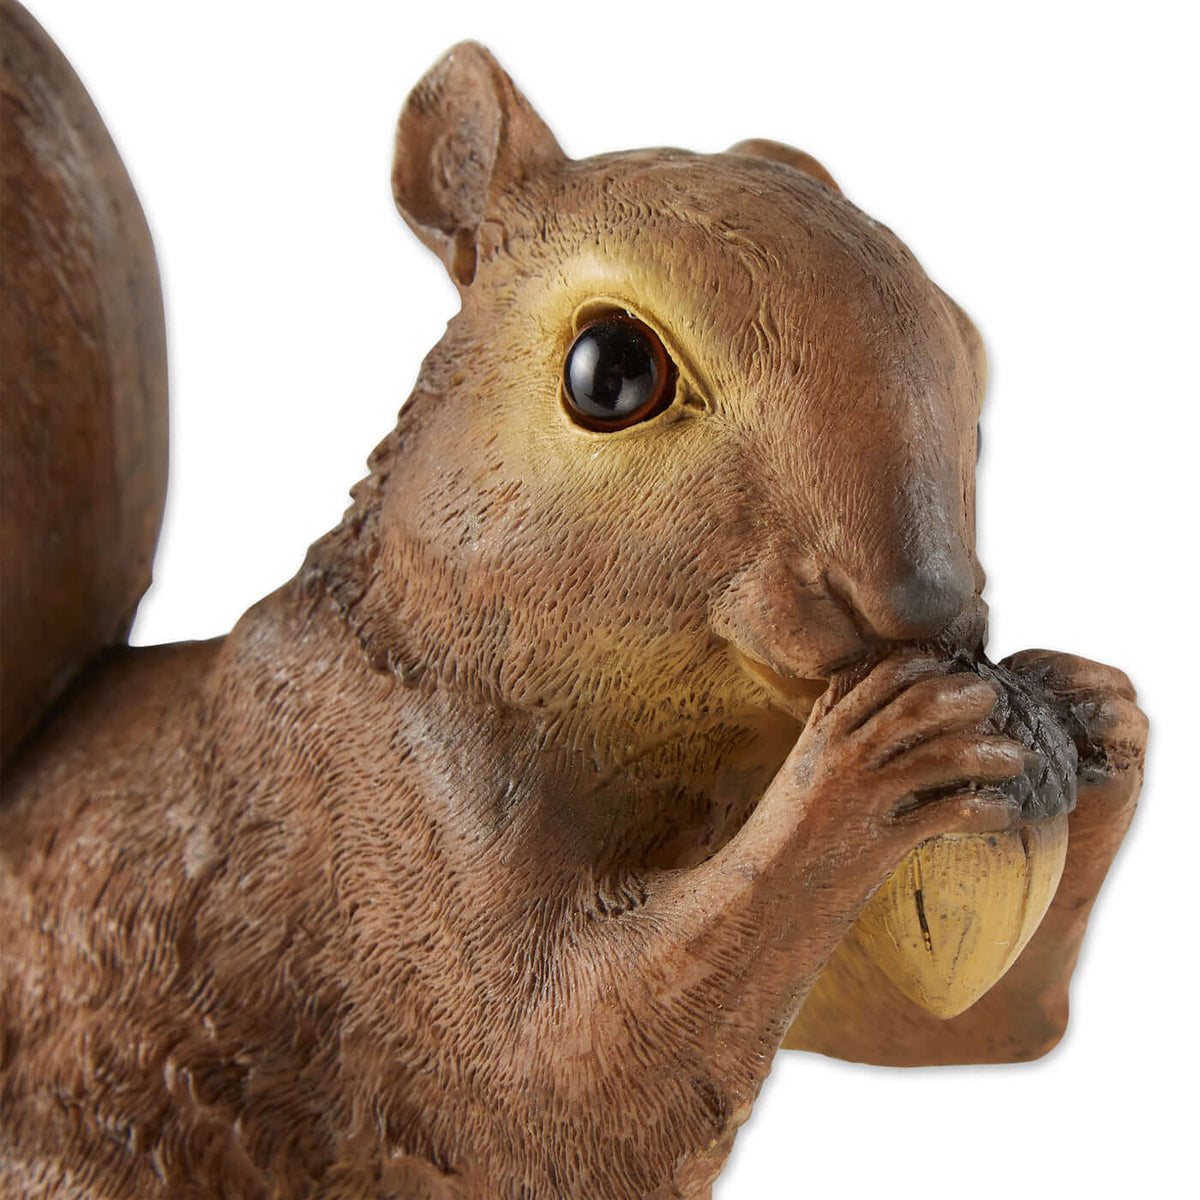 Set of 2 Nibbling Squirrel Garden Statues - The House of Awareness